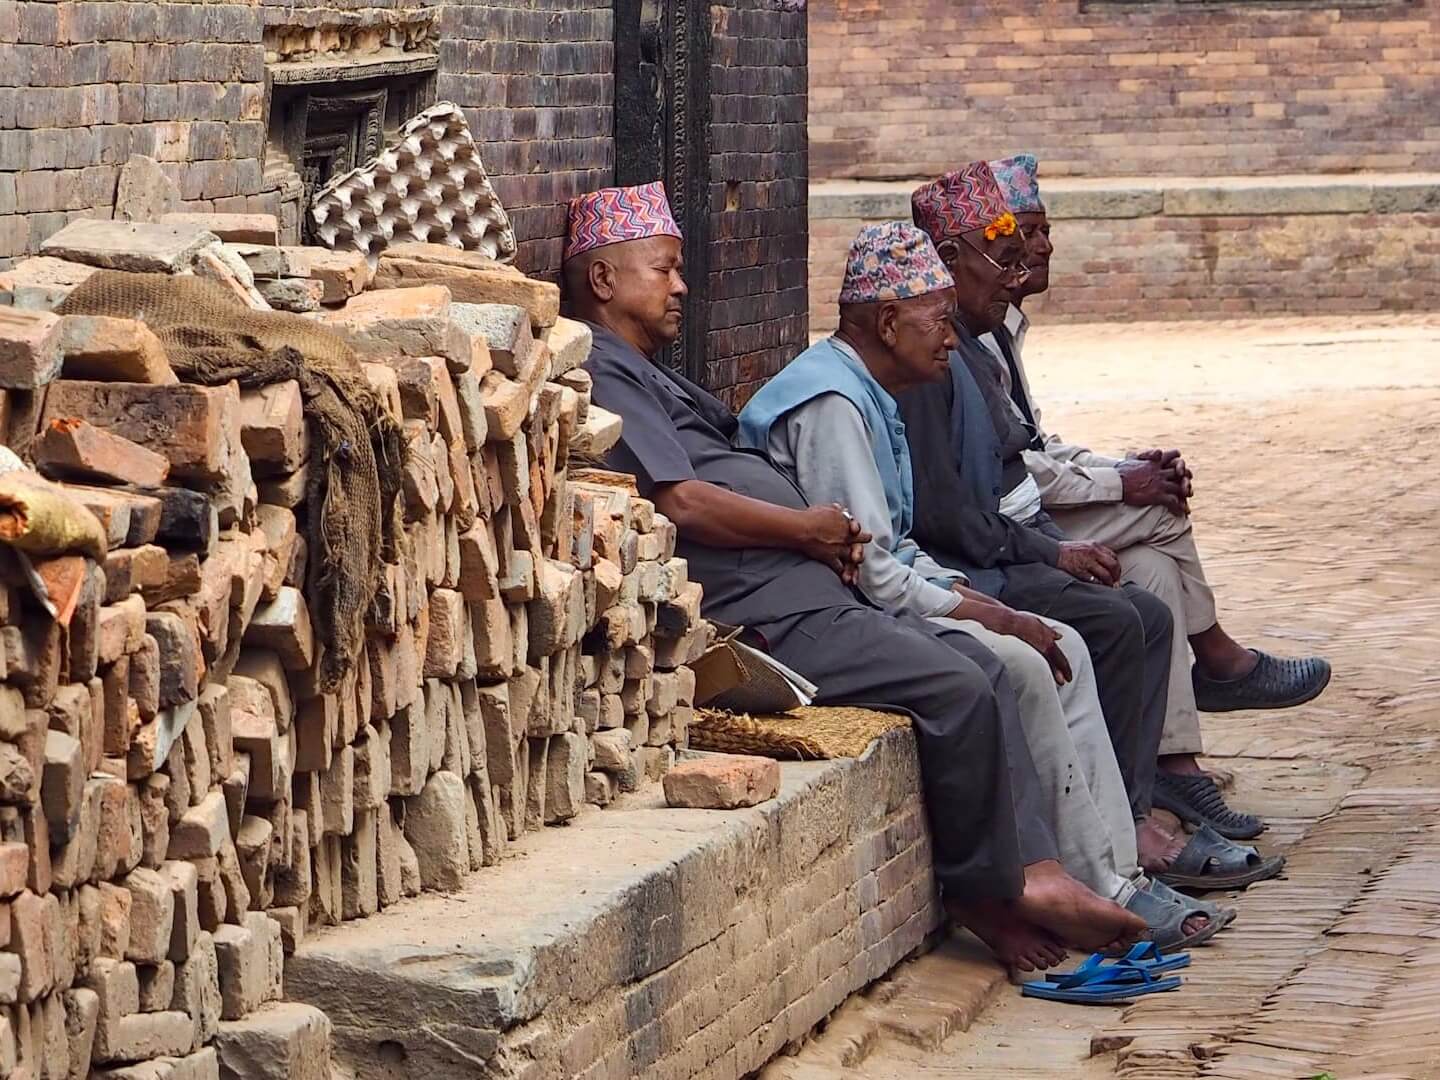 A pile of bricks in the foreground lead to four men sitting at the side of a street